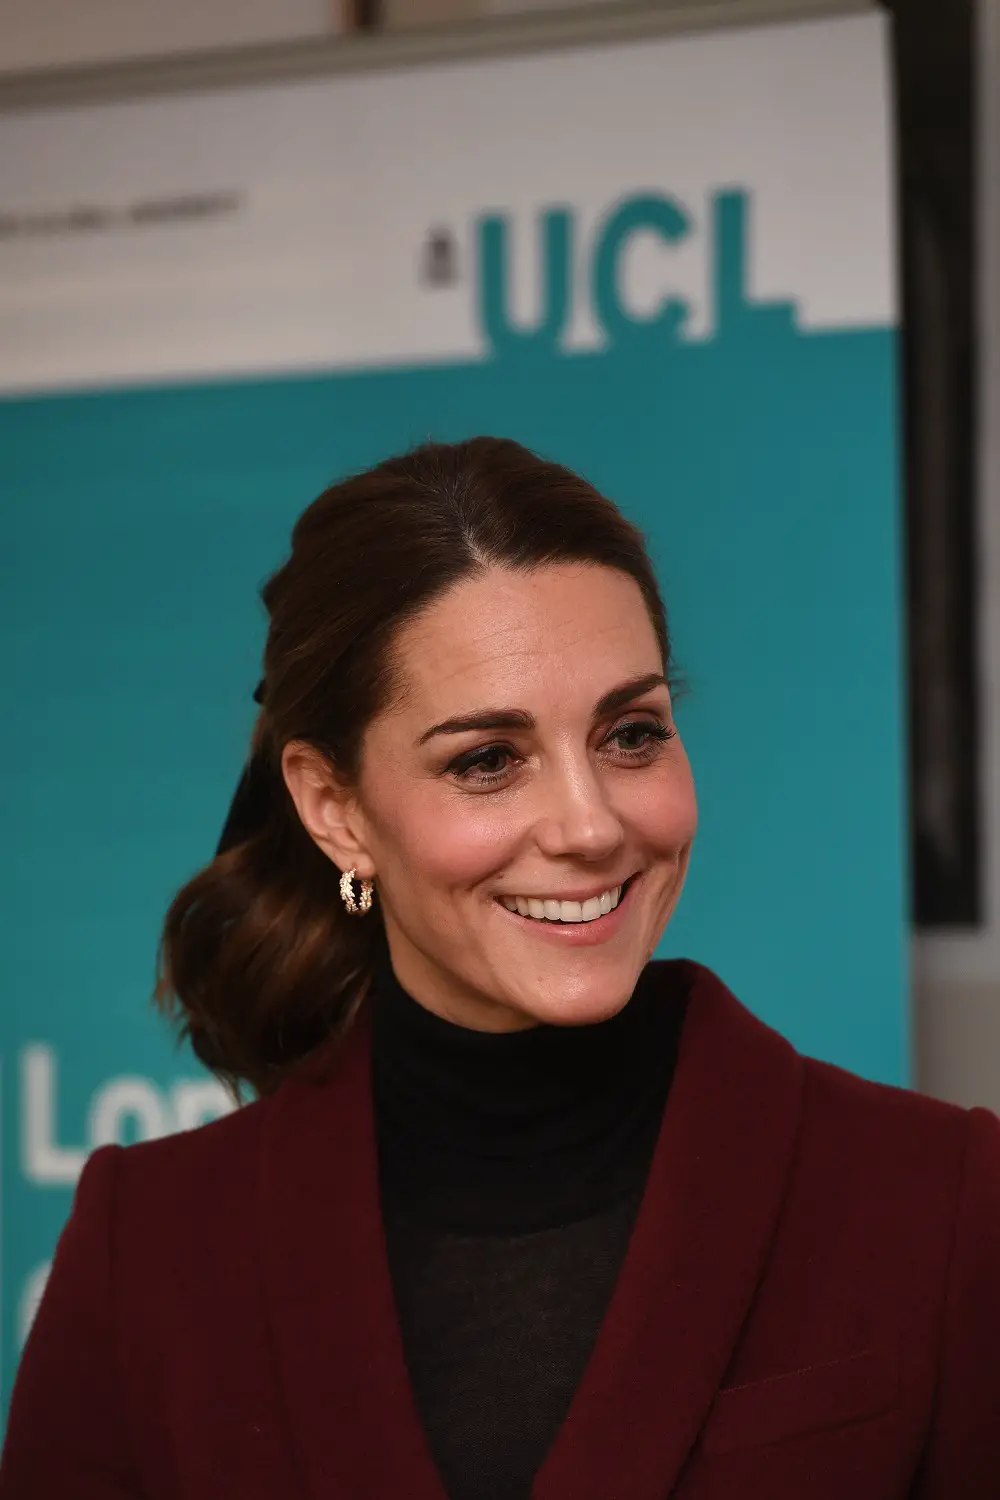 The Duchess of Cambridge's embargoed appearance in familiar burgundy Skirt Suit